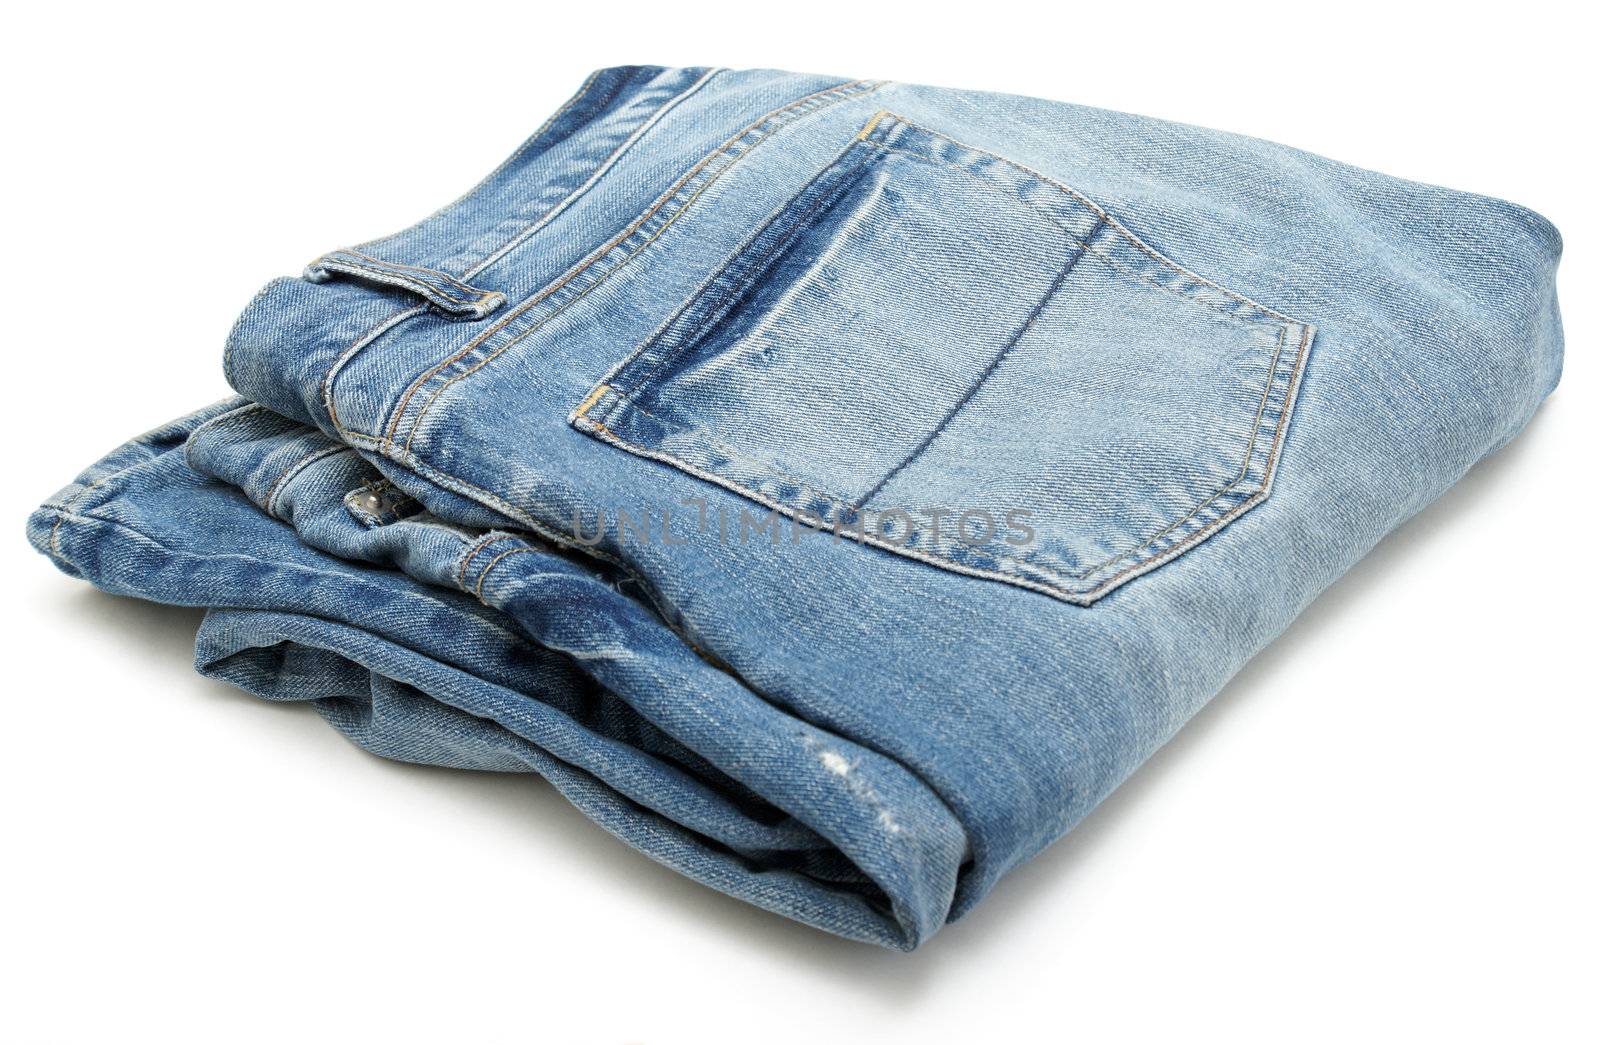 Folded Pair of Jeans by AlphaBaby